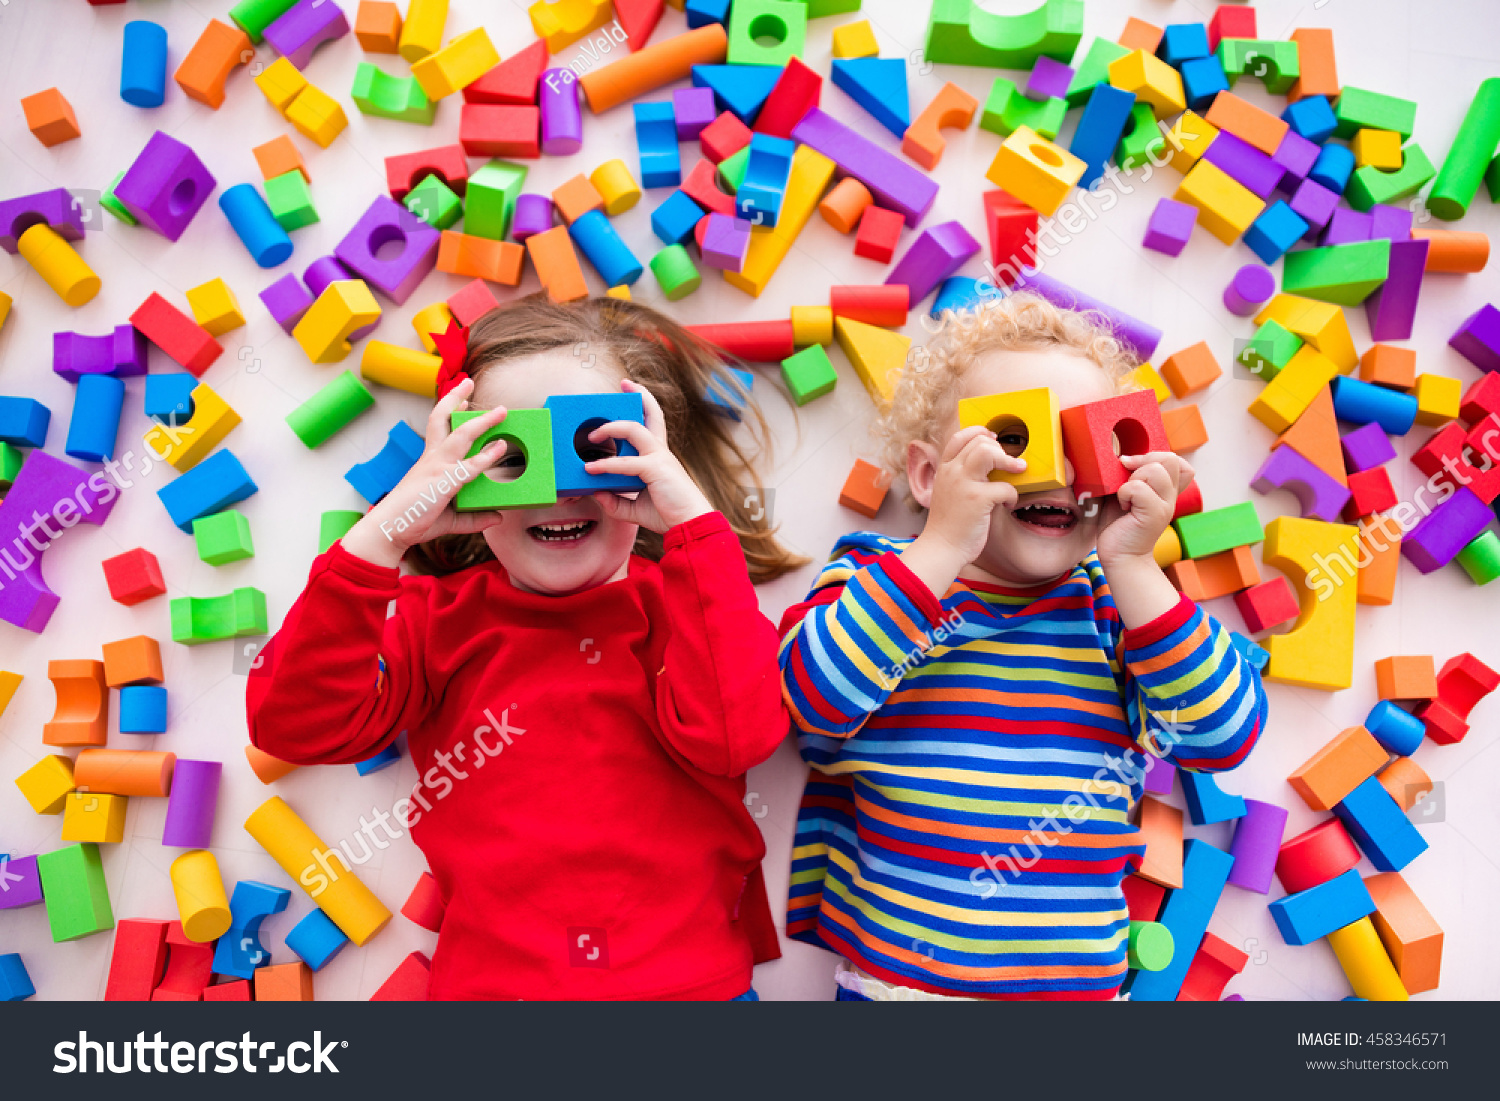 Happy preschool age children play with colorful plastic toy blocks. Creative kindergarten kids build a block tower. Educational toys for toddler or baby. Top view from above. #458346571